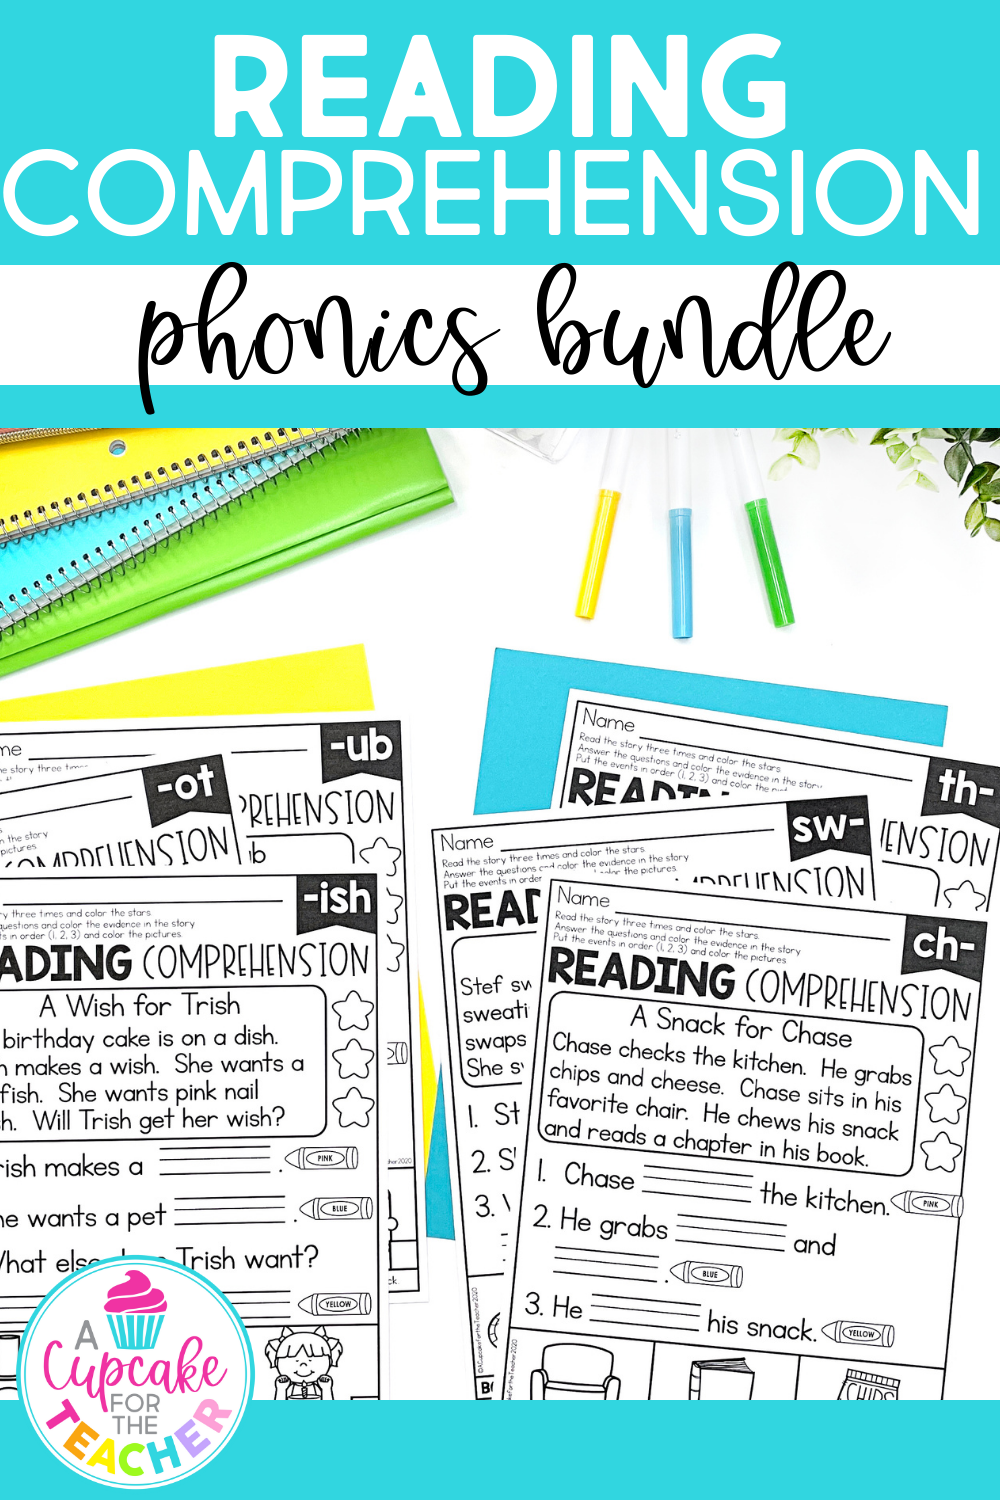 These reading comprehension passages help build phonemic awareness, fluency, and comprehension in little readers.